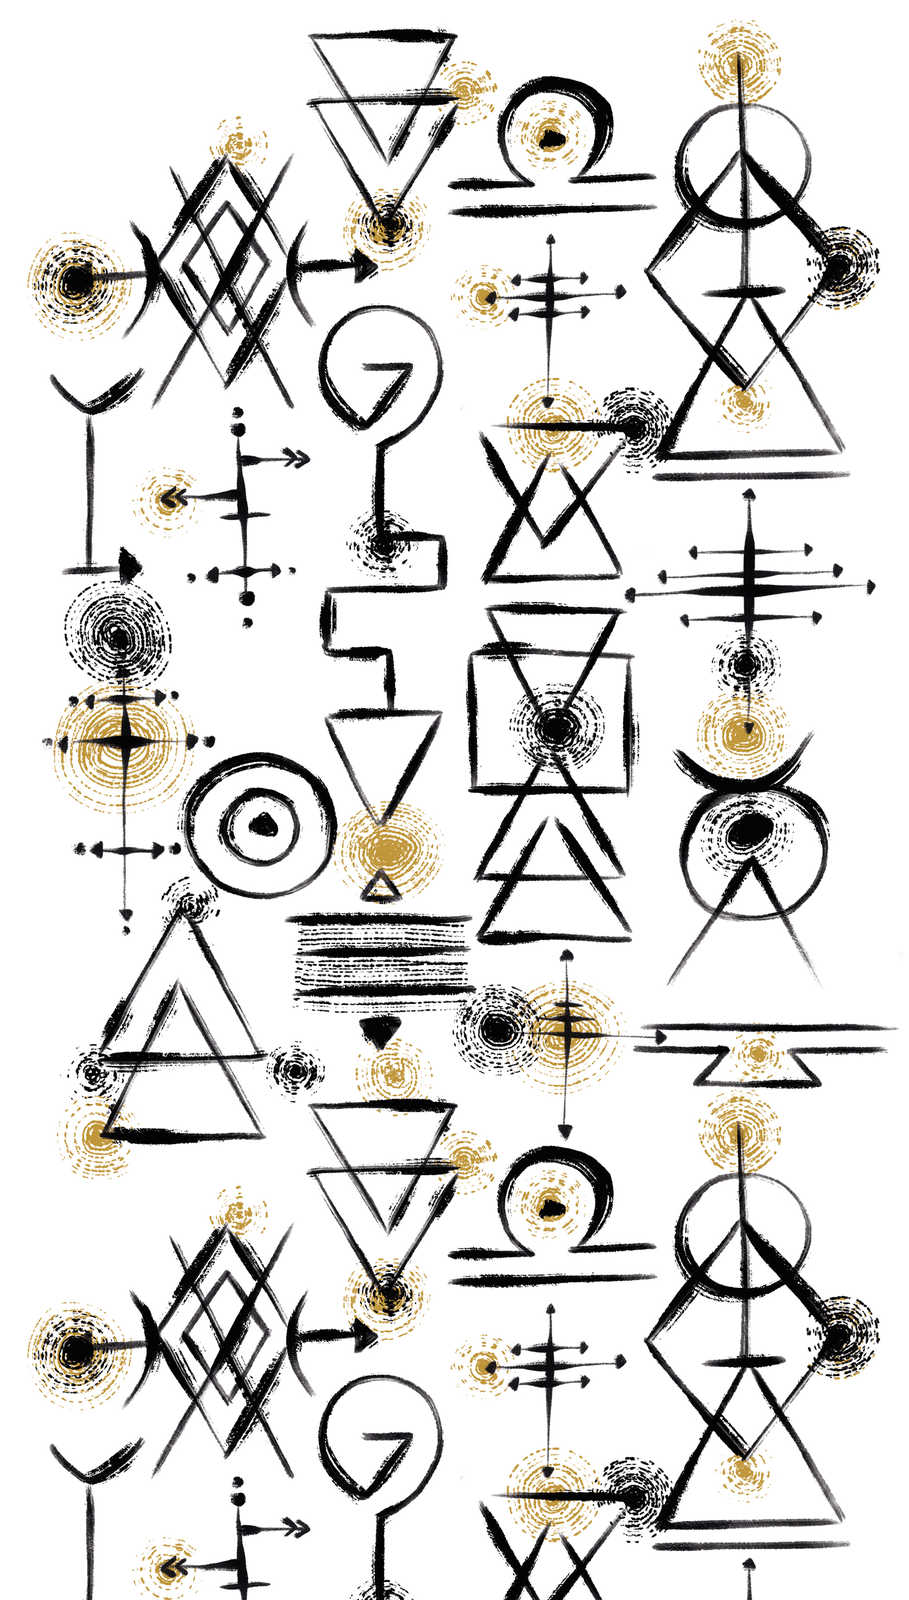             Wallpaper with abstract symbols on a light background - white, black, gold
        